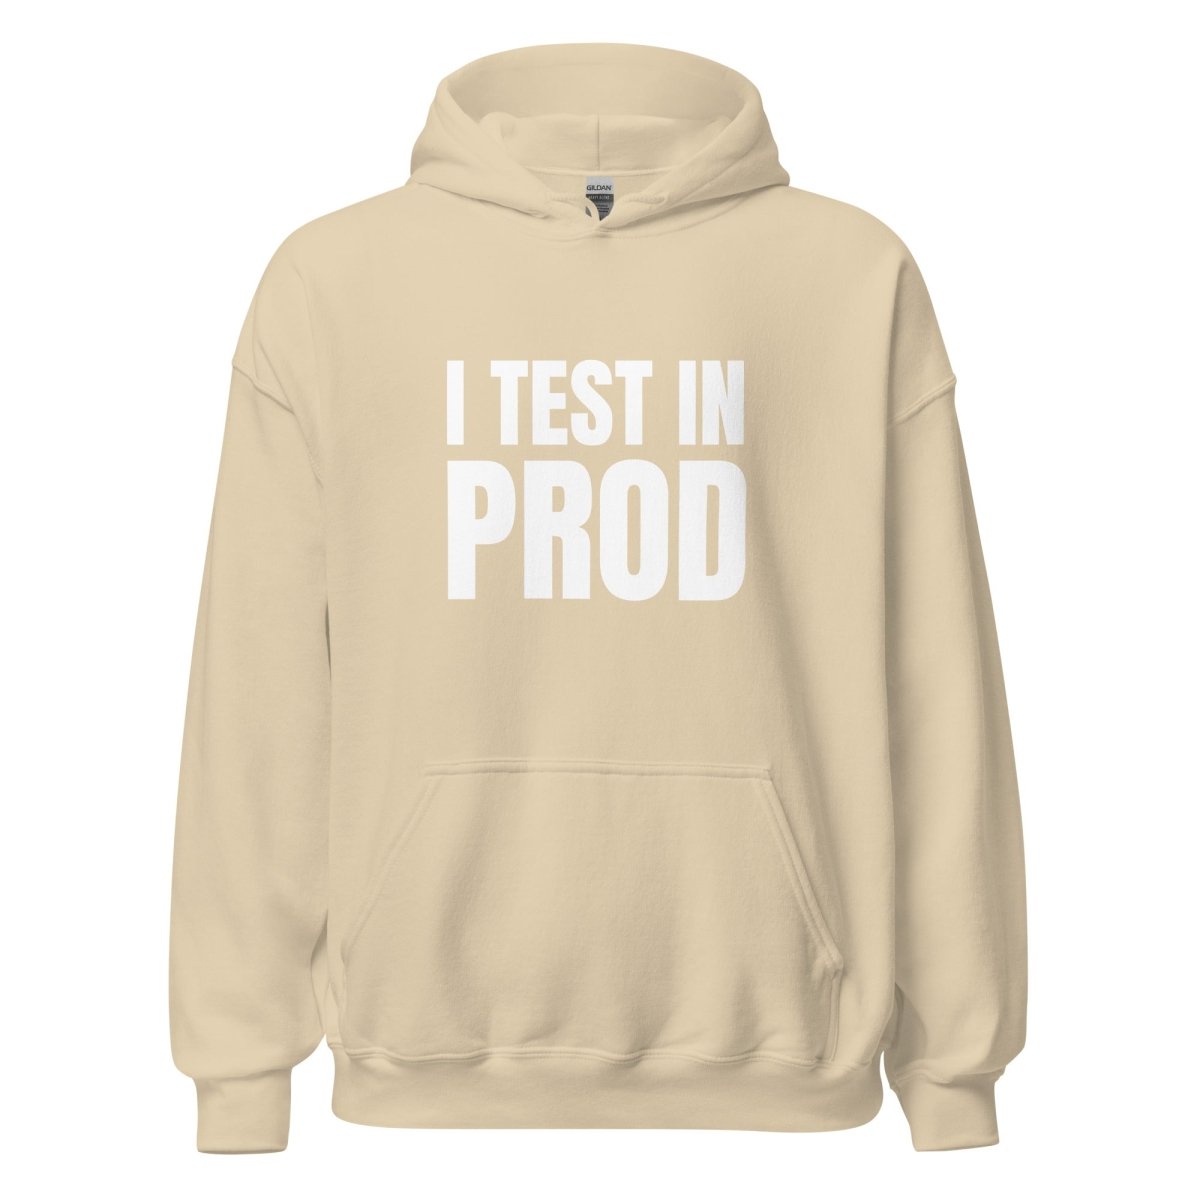 I Test in Prod Hoodie (unisex) - Sand - AI Store